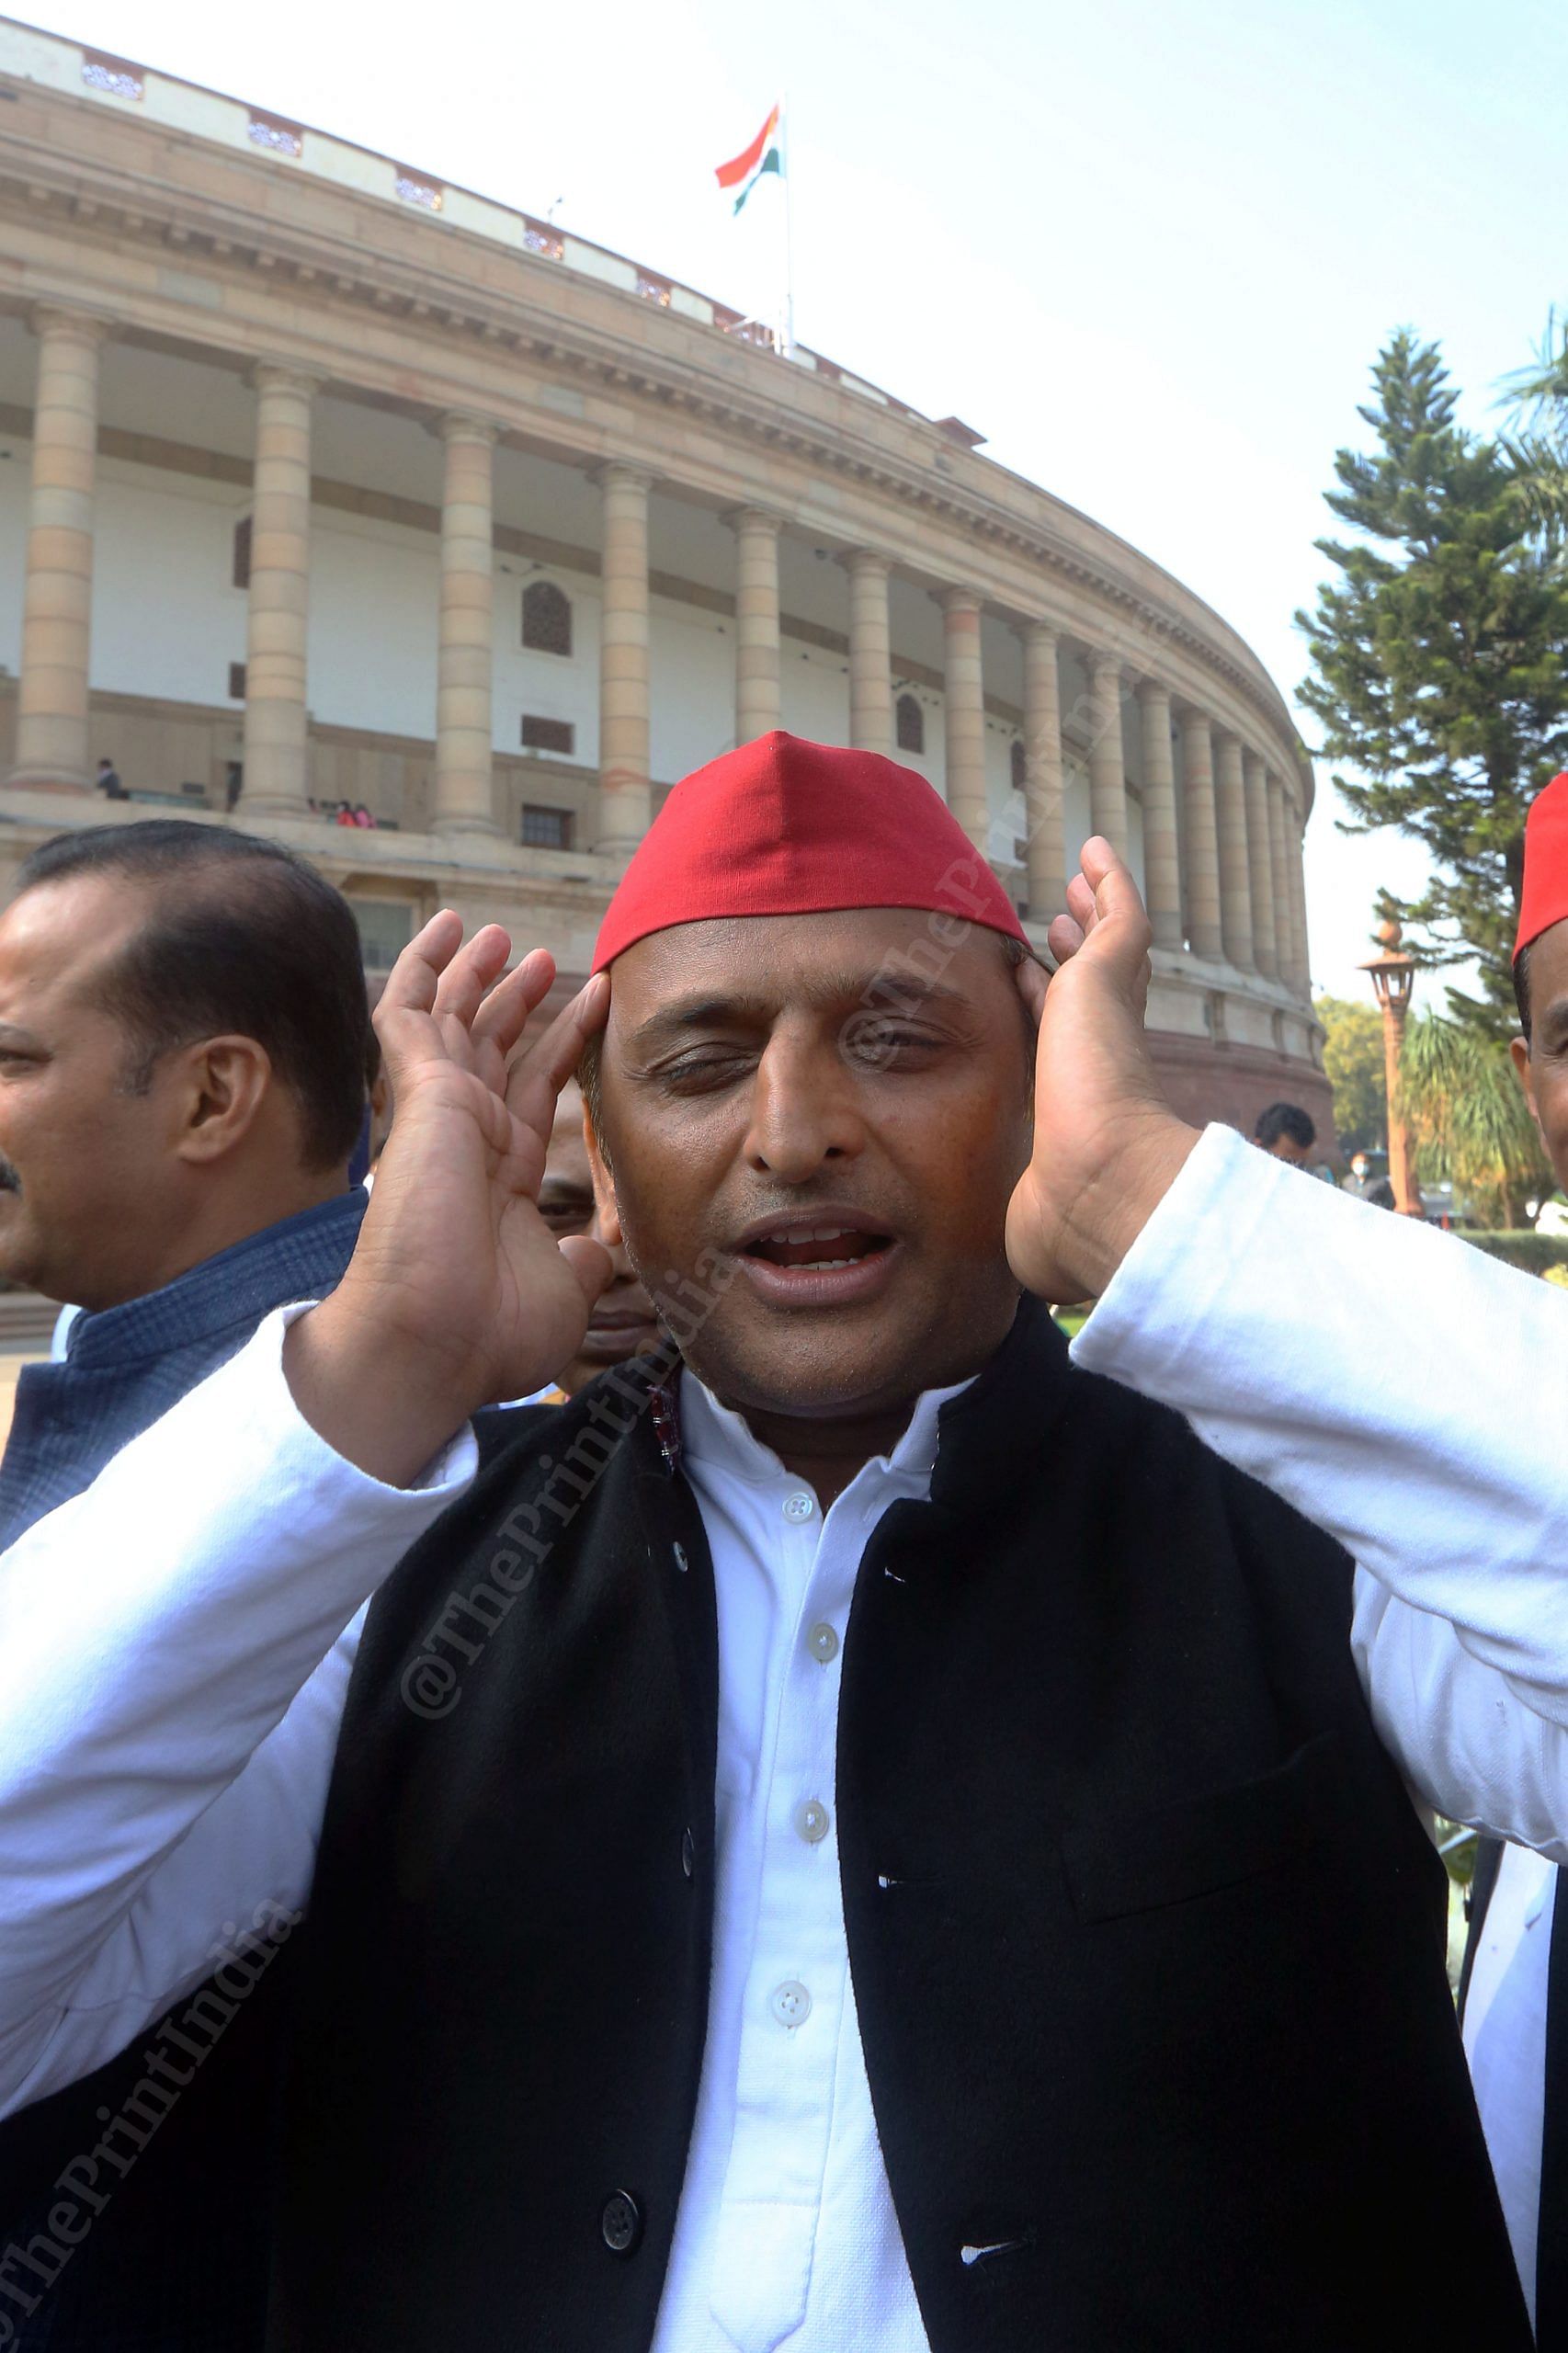 Samajwadi Party President Akhilesh Yadav adjusts his cap, as he arrives in Parliament to support the suspended Rajya Sabha MPs, who have been staging a protest near a statue of Mahatma Gandhi in the Parliament complex | Photo: Praveen Jain | ThePrint 